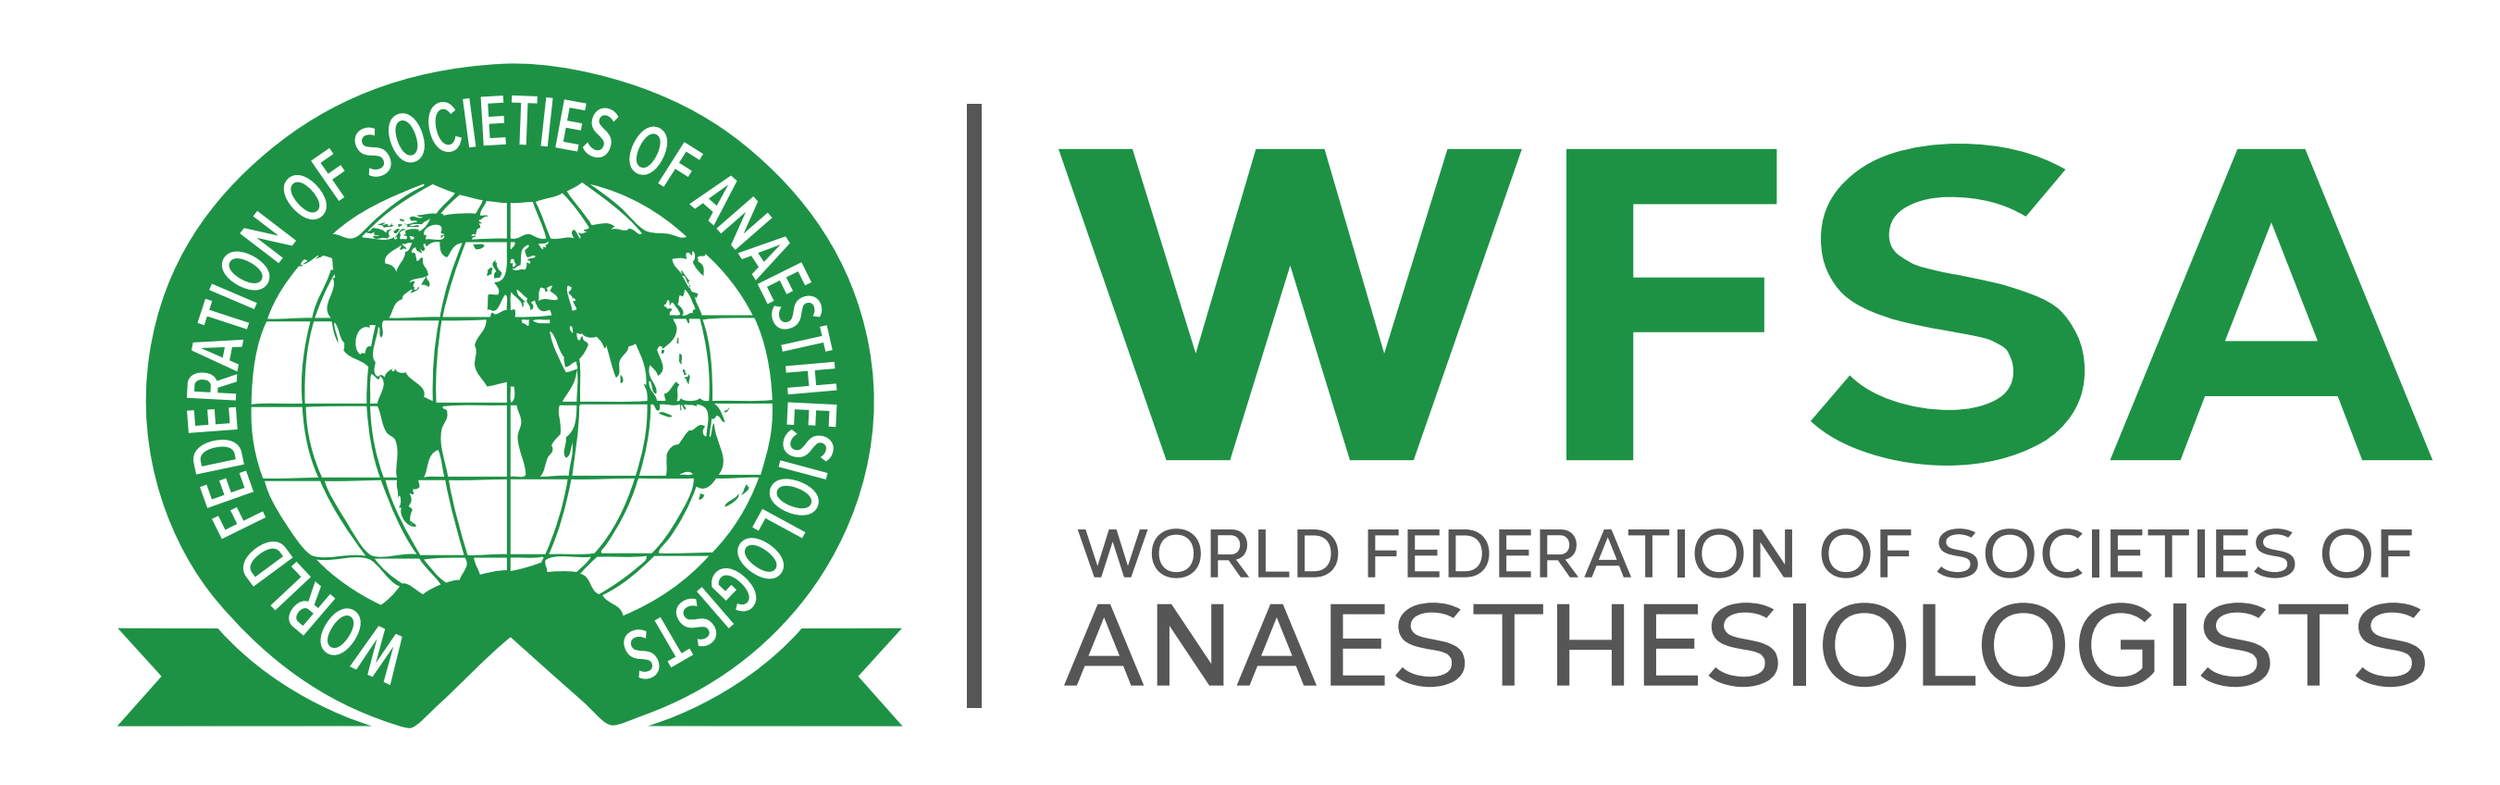 World Federation of Societies of Anaesthesiologists (WFSA) Logo.png